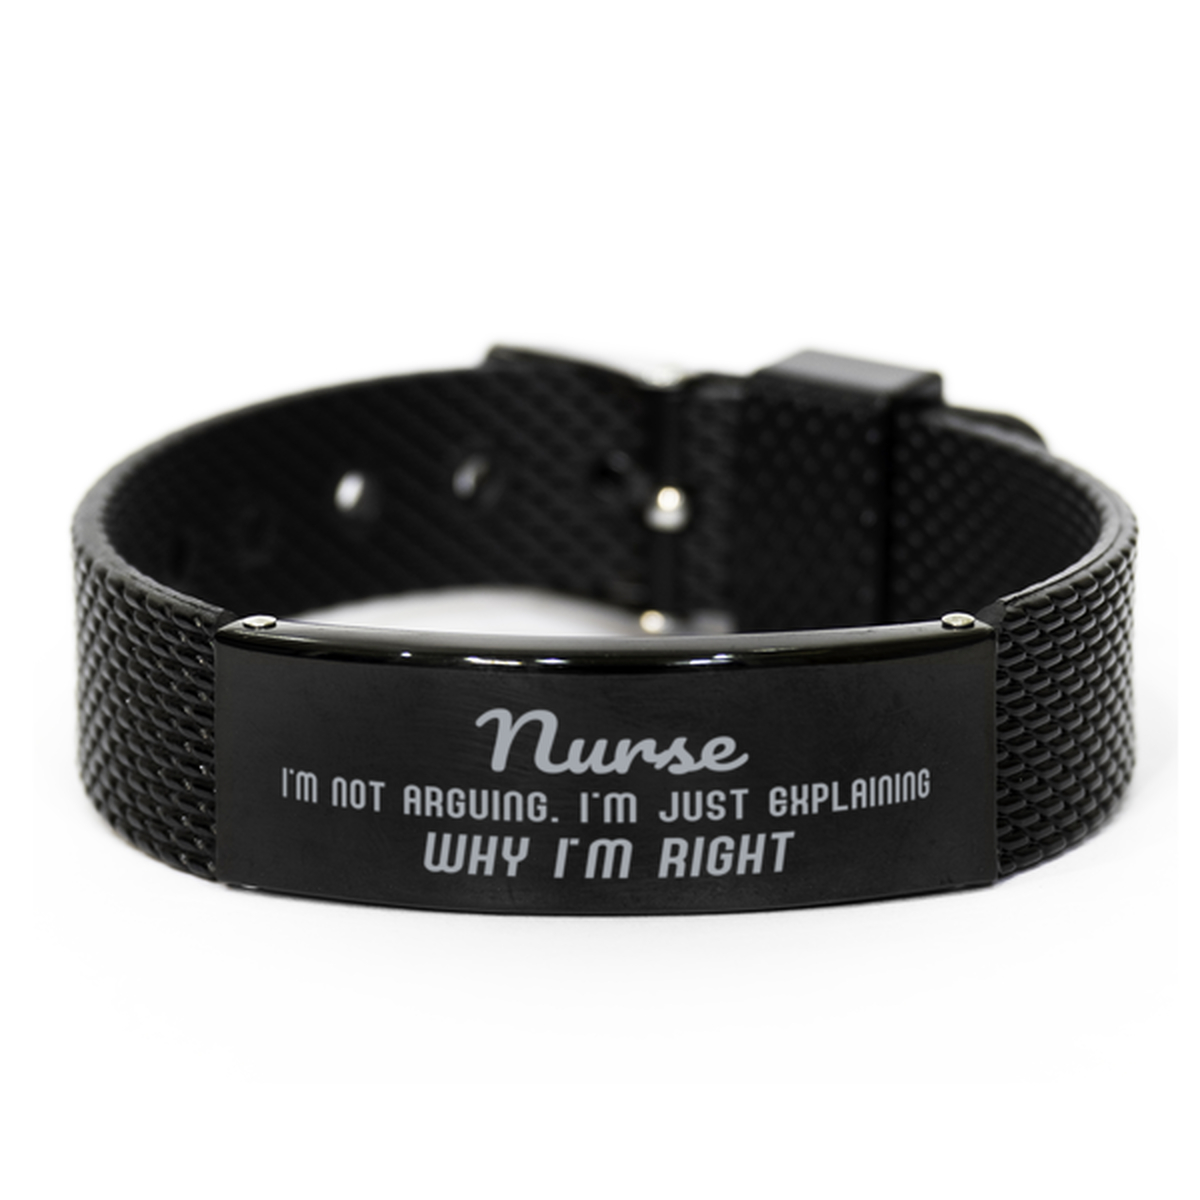 Nurse I'm not Arguing. I'm Just Explaining Why I'm RIGHT Black Shark Mesh Bracelet, Funny Saying Quote Nurse Gifts For Nurse Graduation Birthday Christmas Gifts for Men Women Coworker